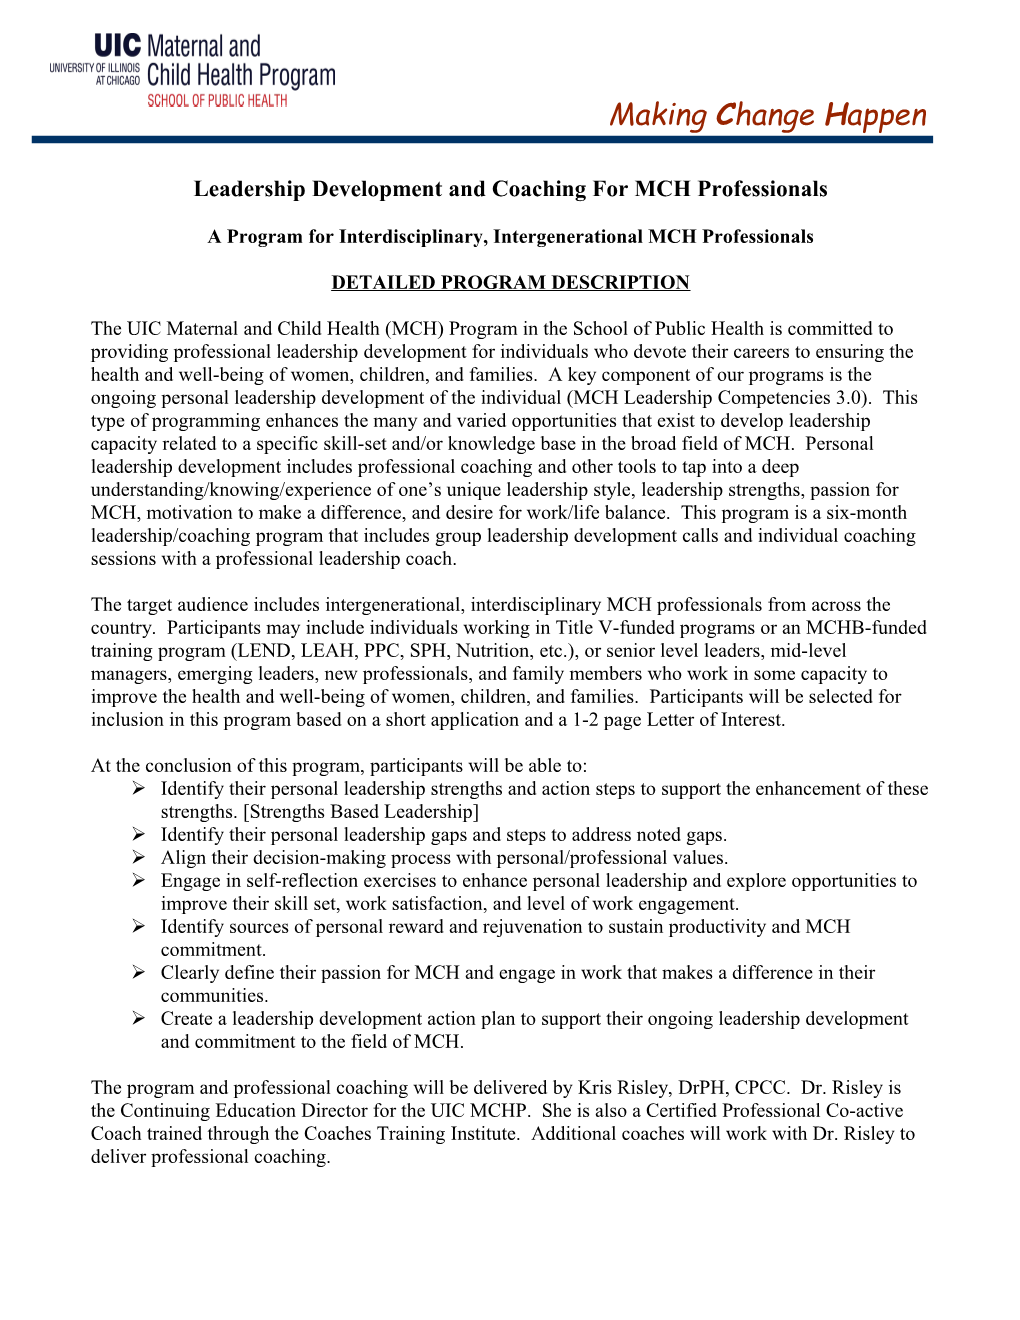 Leadership Development and Coaching for MCH Professionals